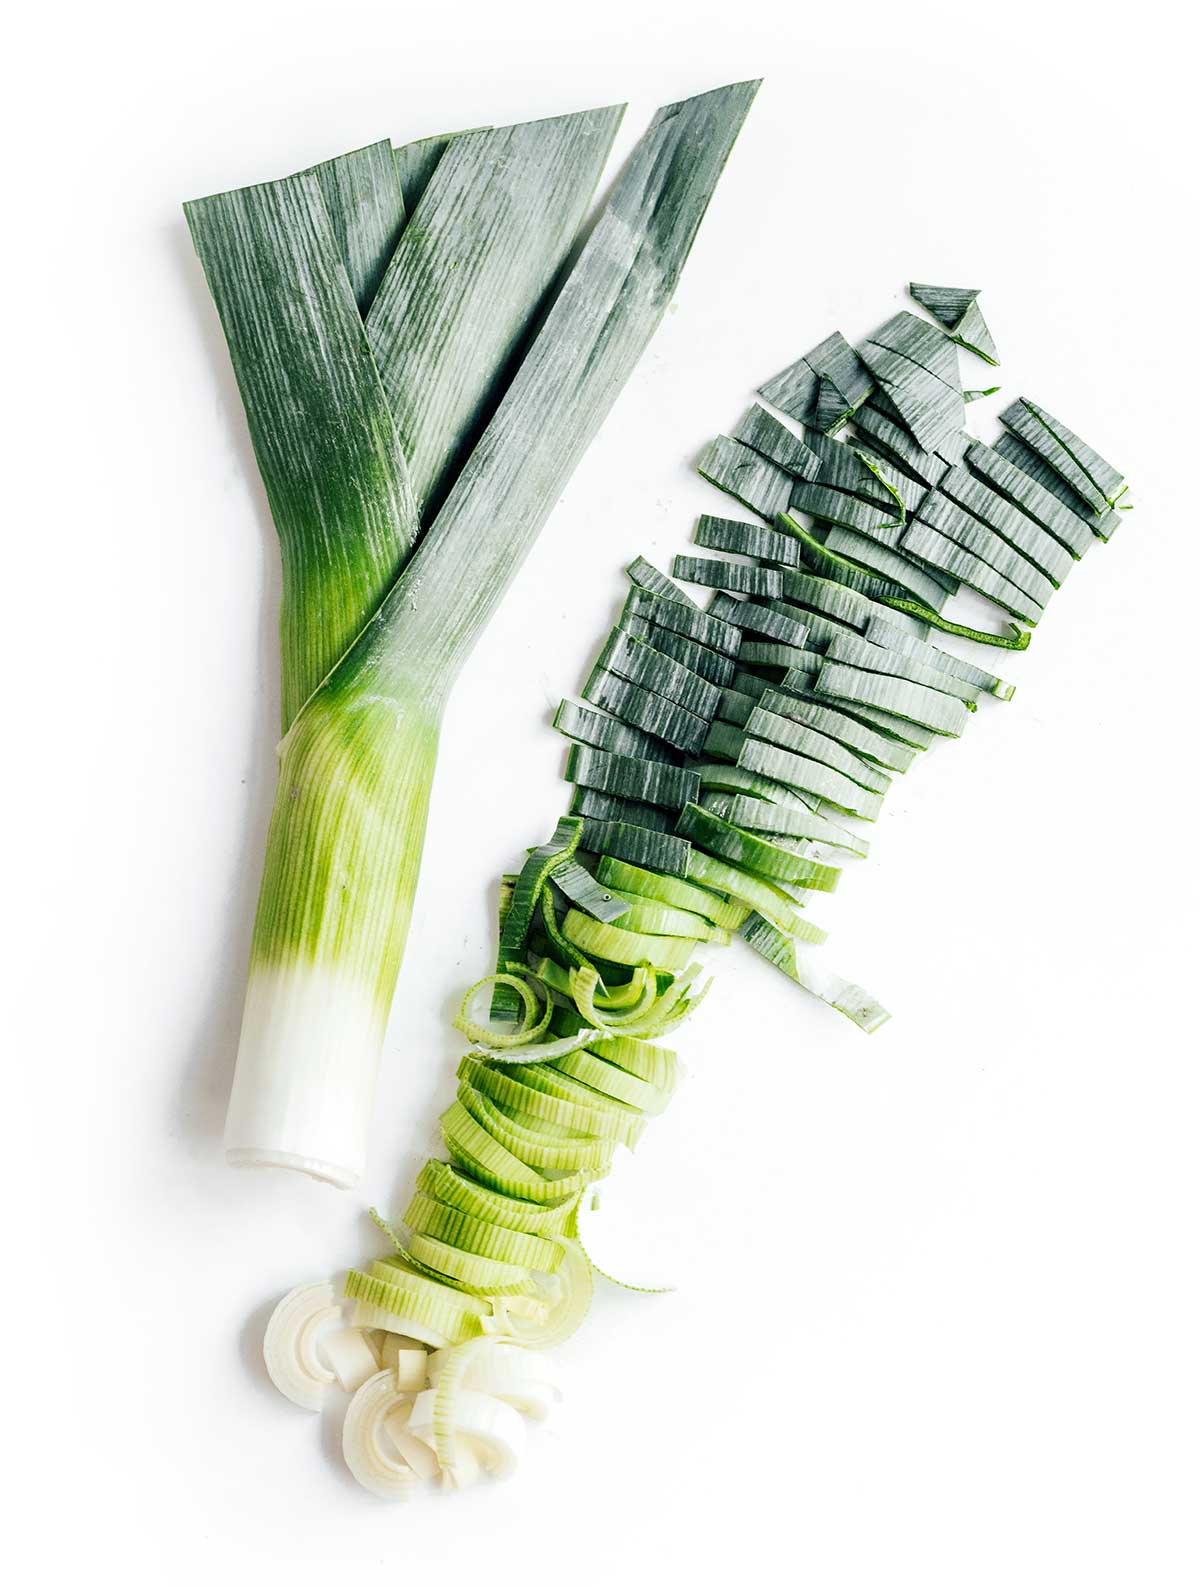 Two leek halves side by side, one whole and one chopped, detailing how to cut leeks